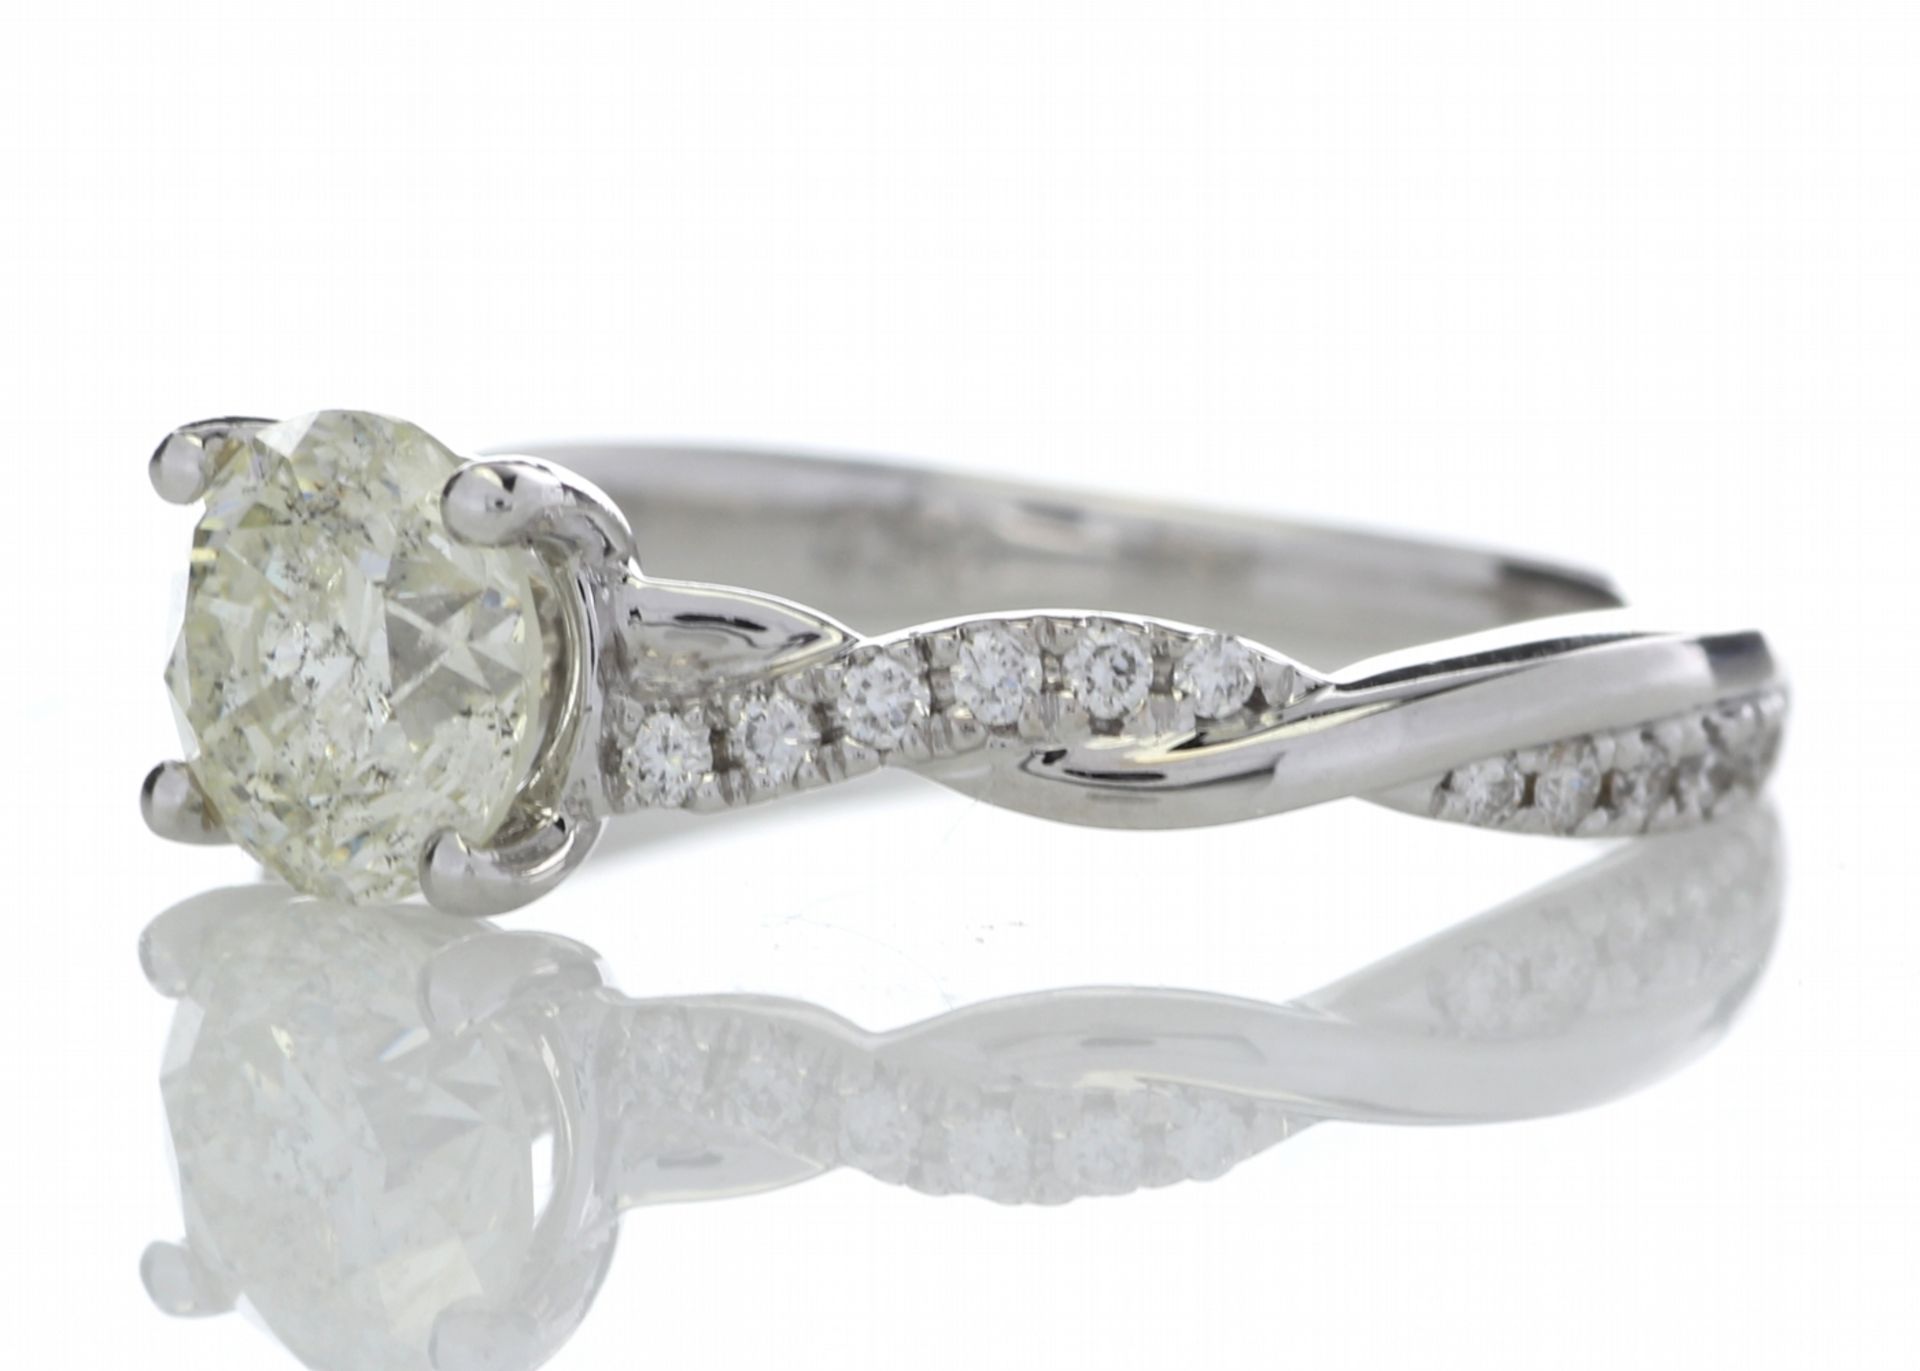 18ct White Gold Diamond Ring With Waved Stone Set Shoulders 1.22 Carats - Valued By GIE £27,950.00 - - Image 2 of 6